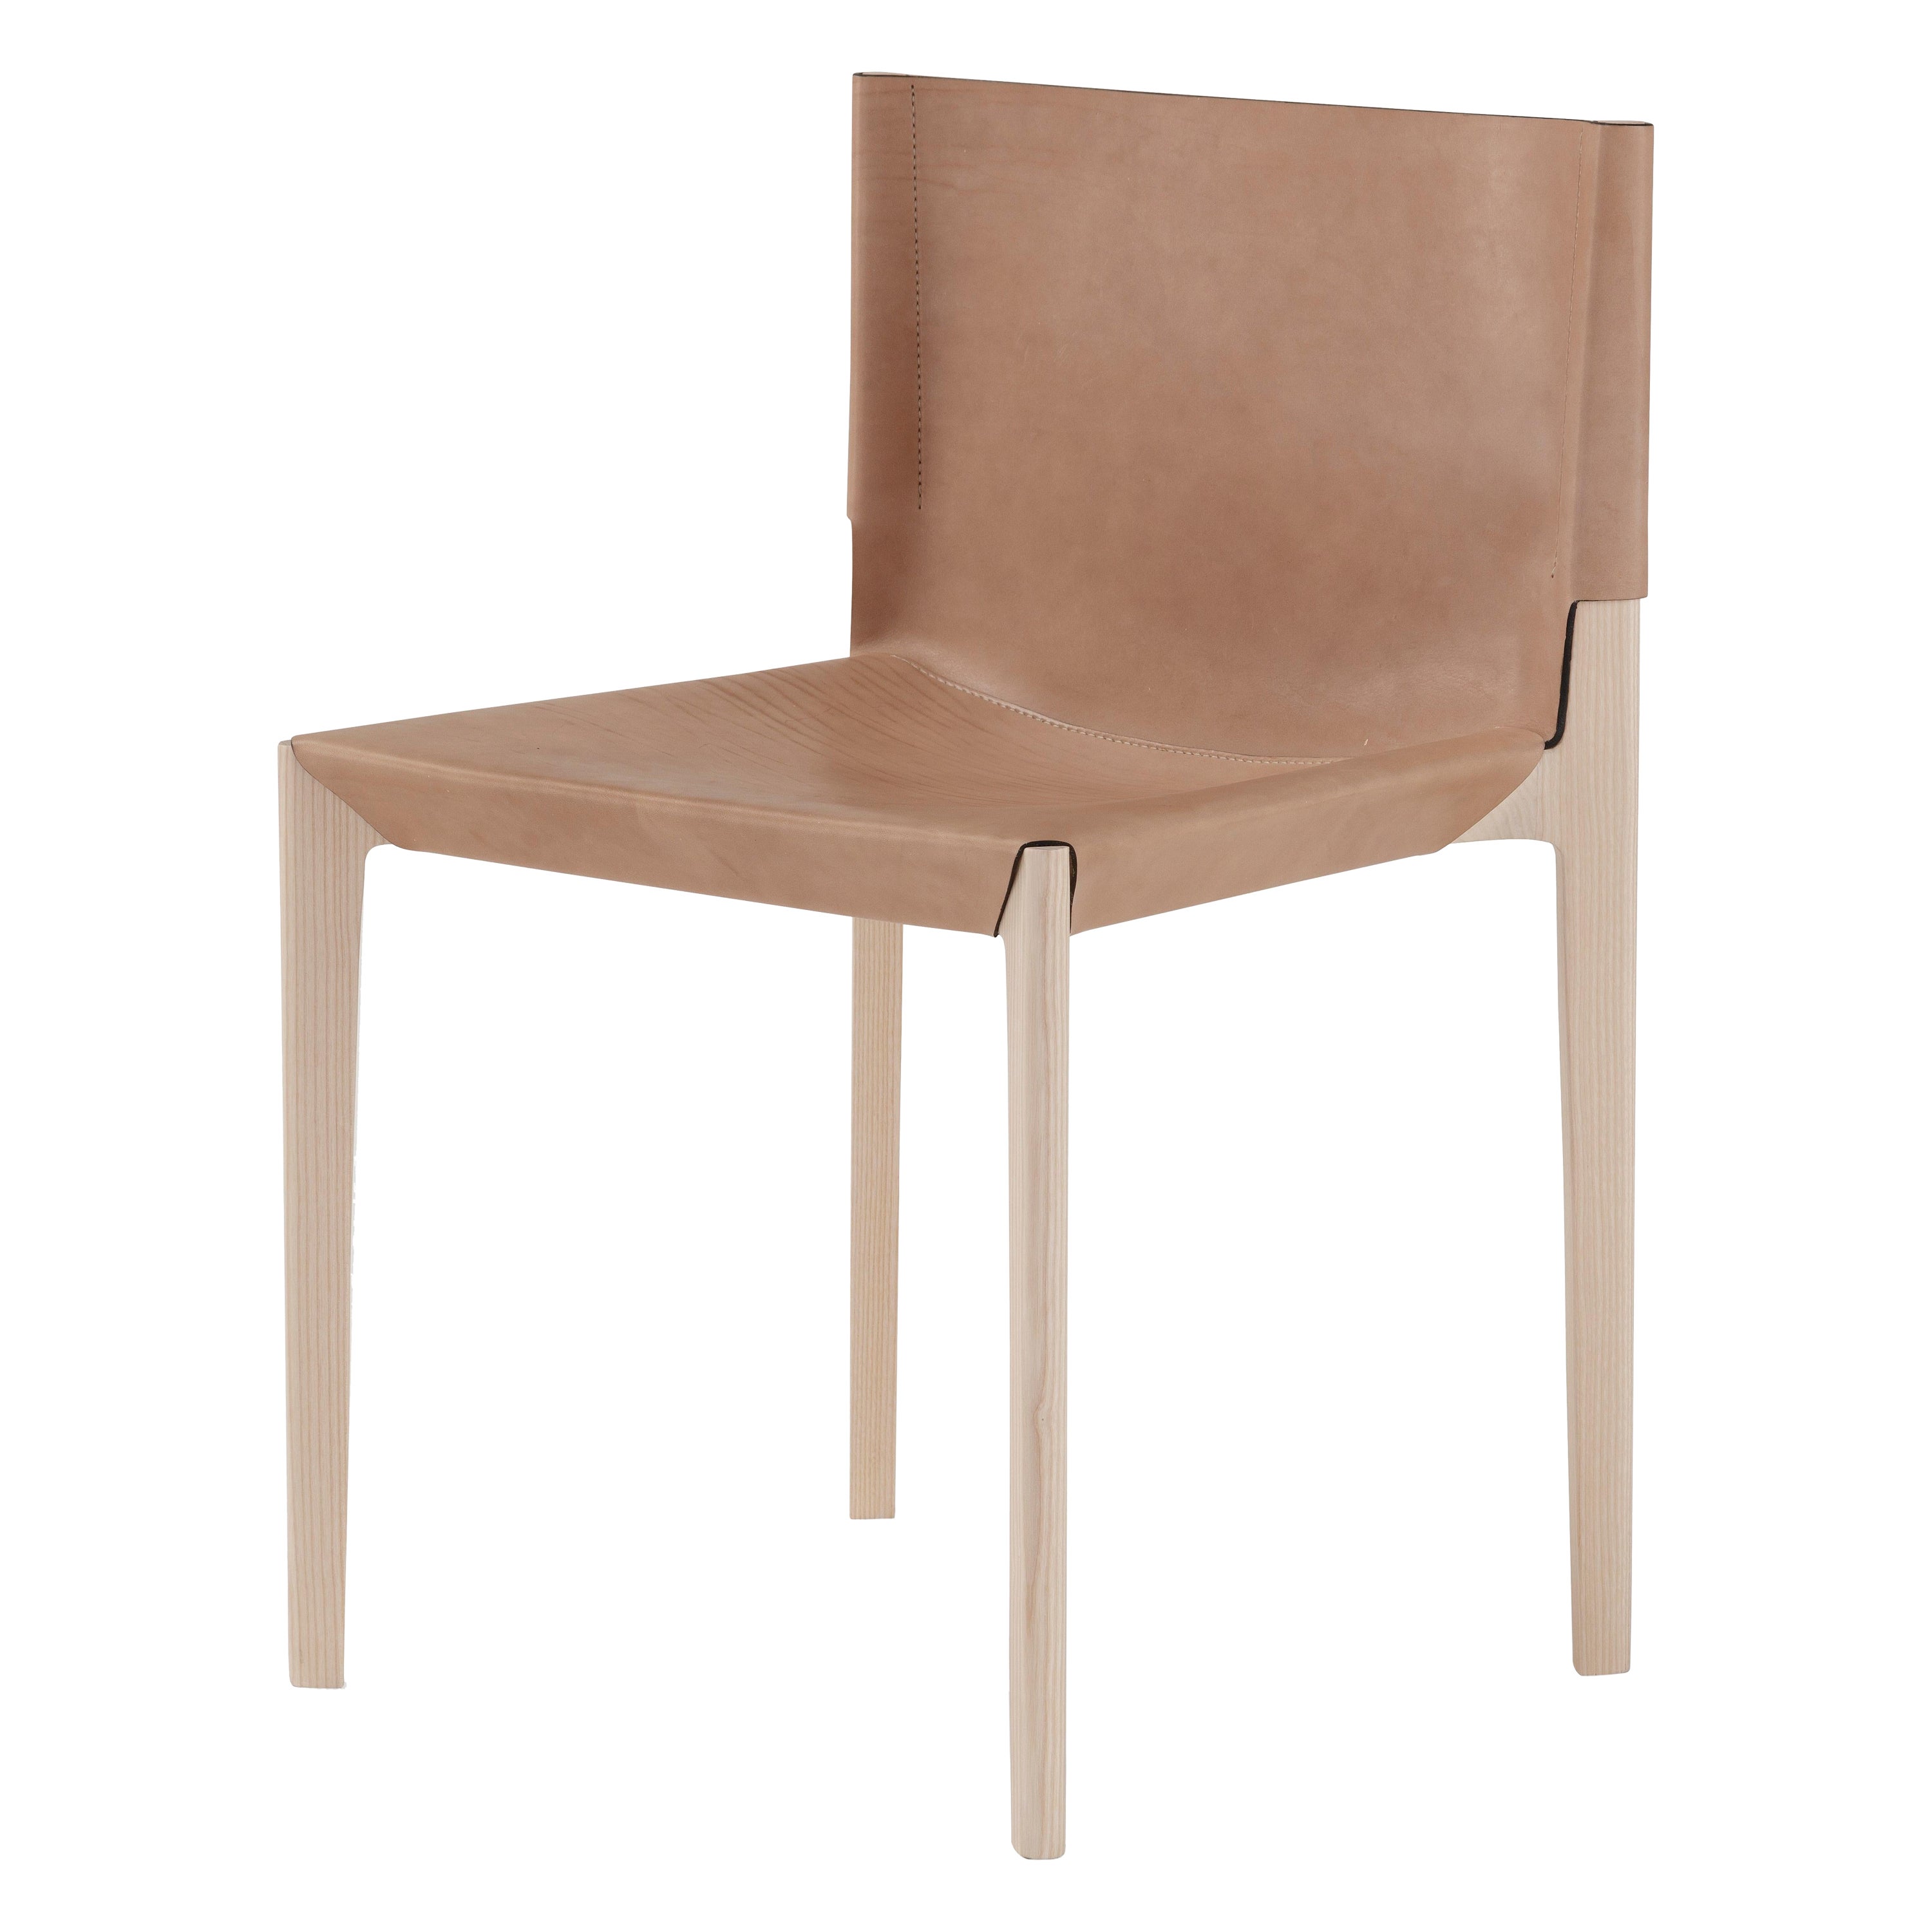 Contemporary Wooden Chair 'Stilt', Cuoio Leather For Sale